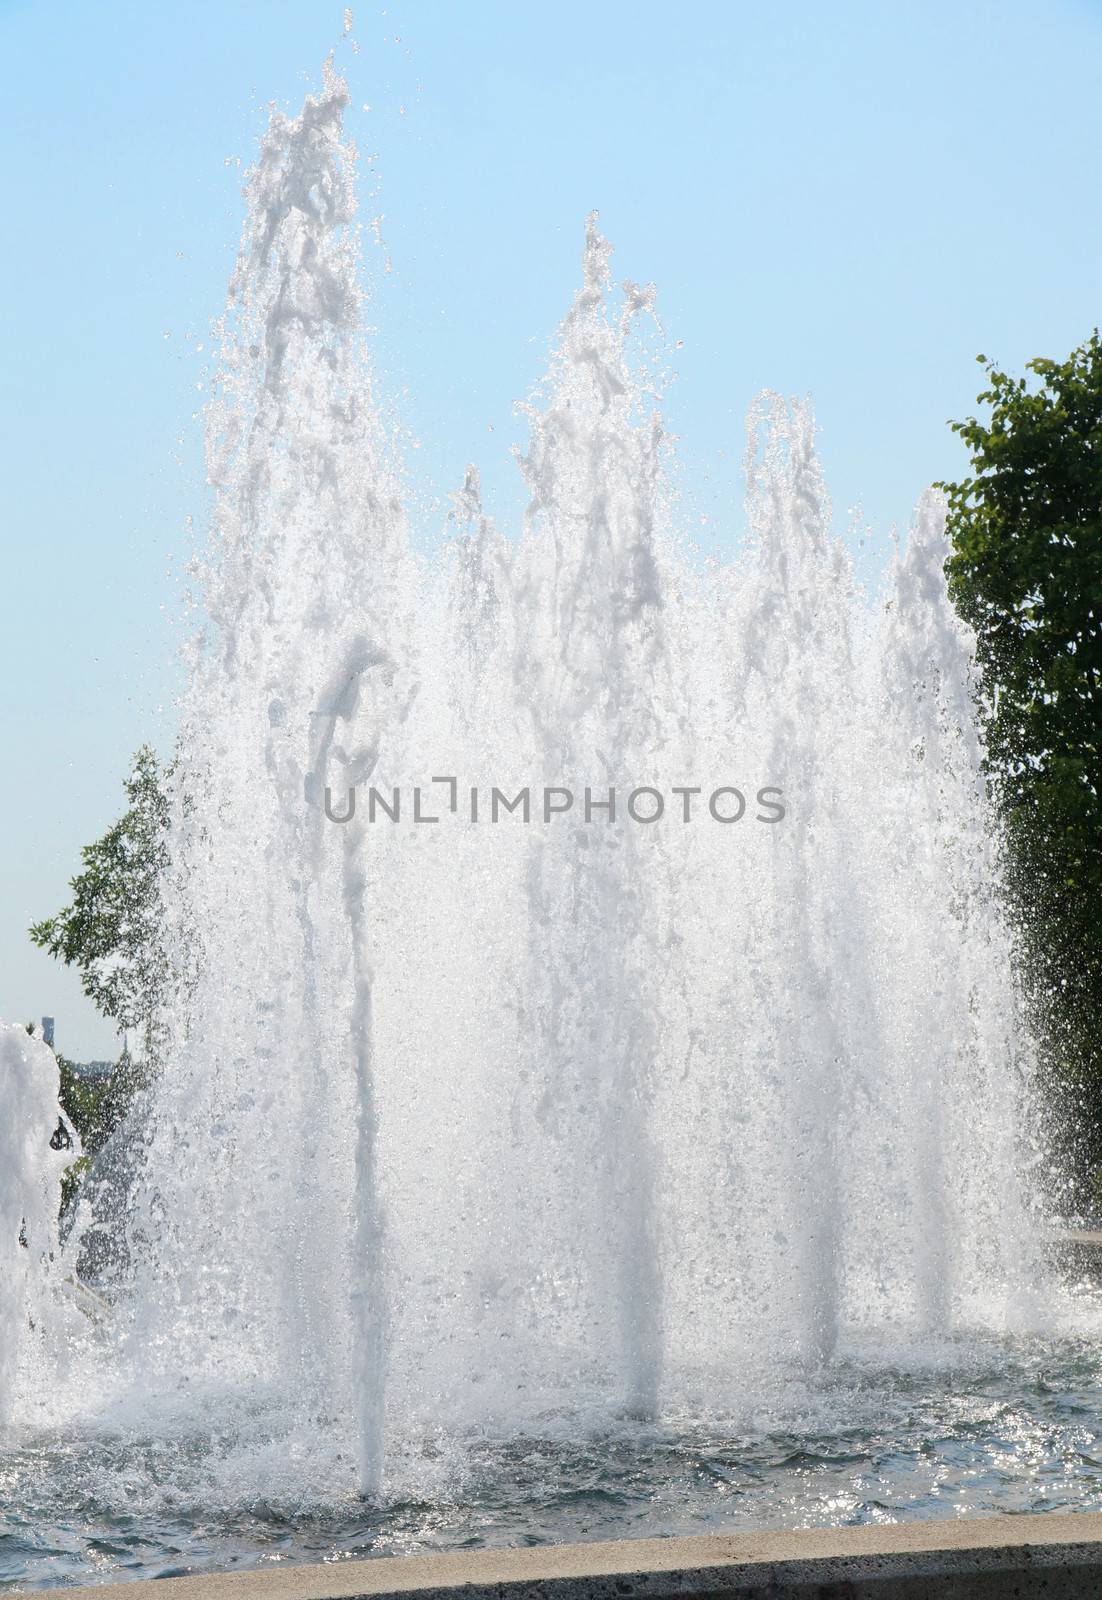 Water fountain by Mirage3